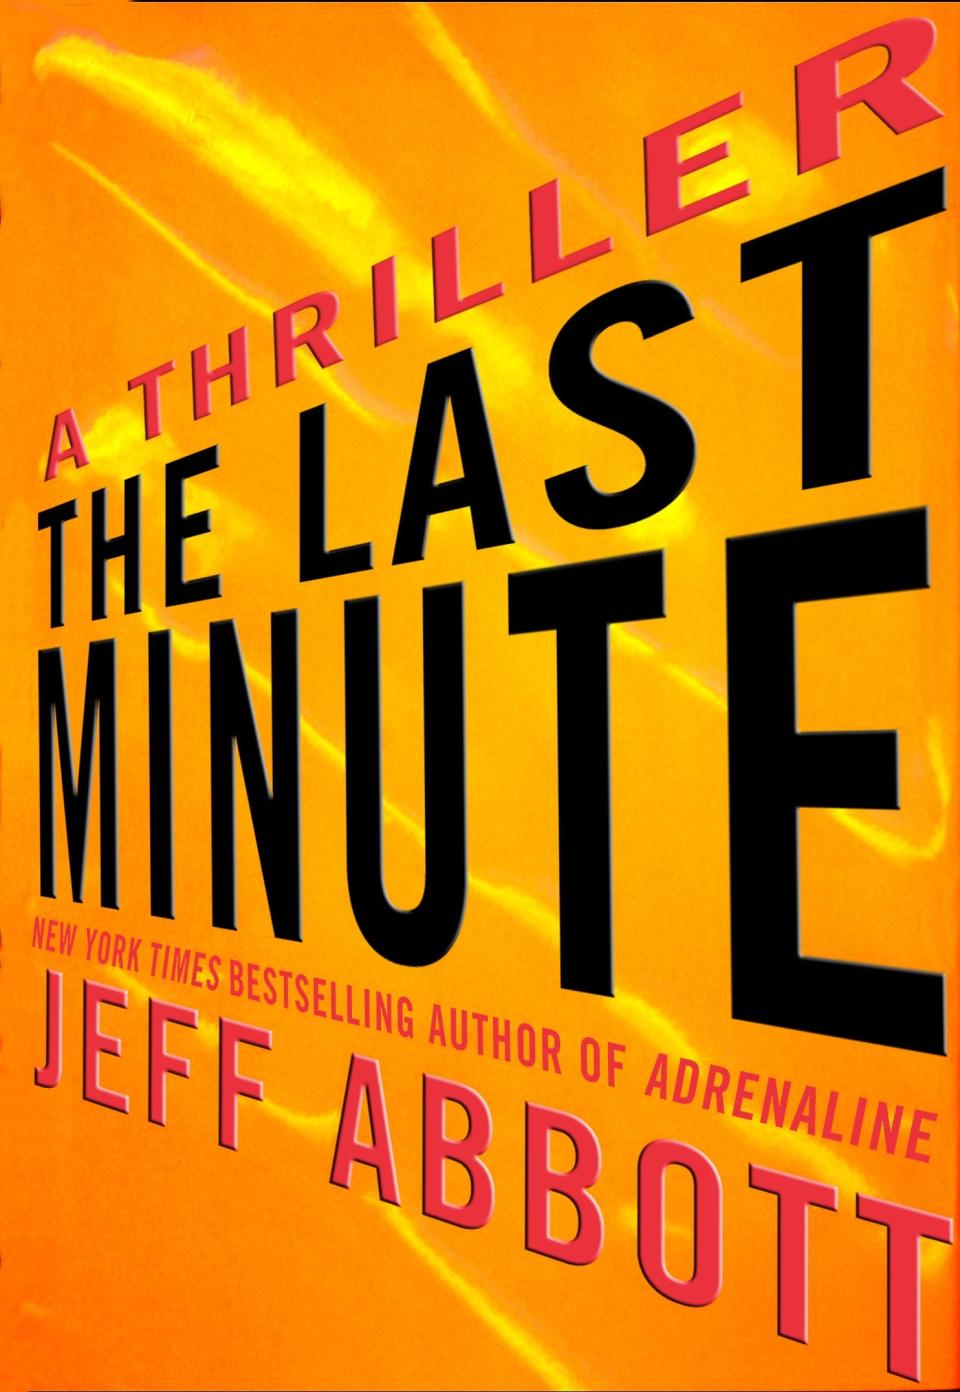 This book cover image released by Grand Central Publishing shows "The Last Minute," by Jeff Abbott. (AP Photo/Grand Central Publishing)